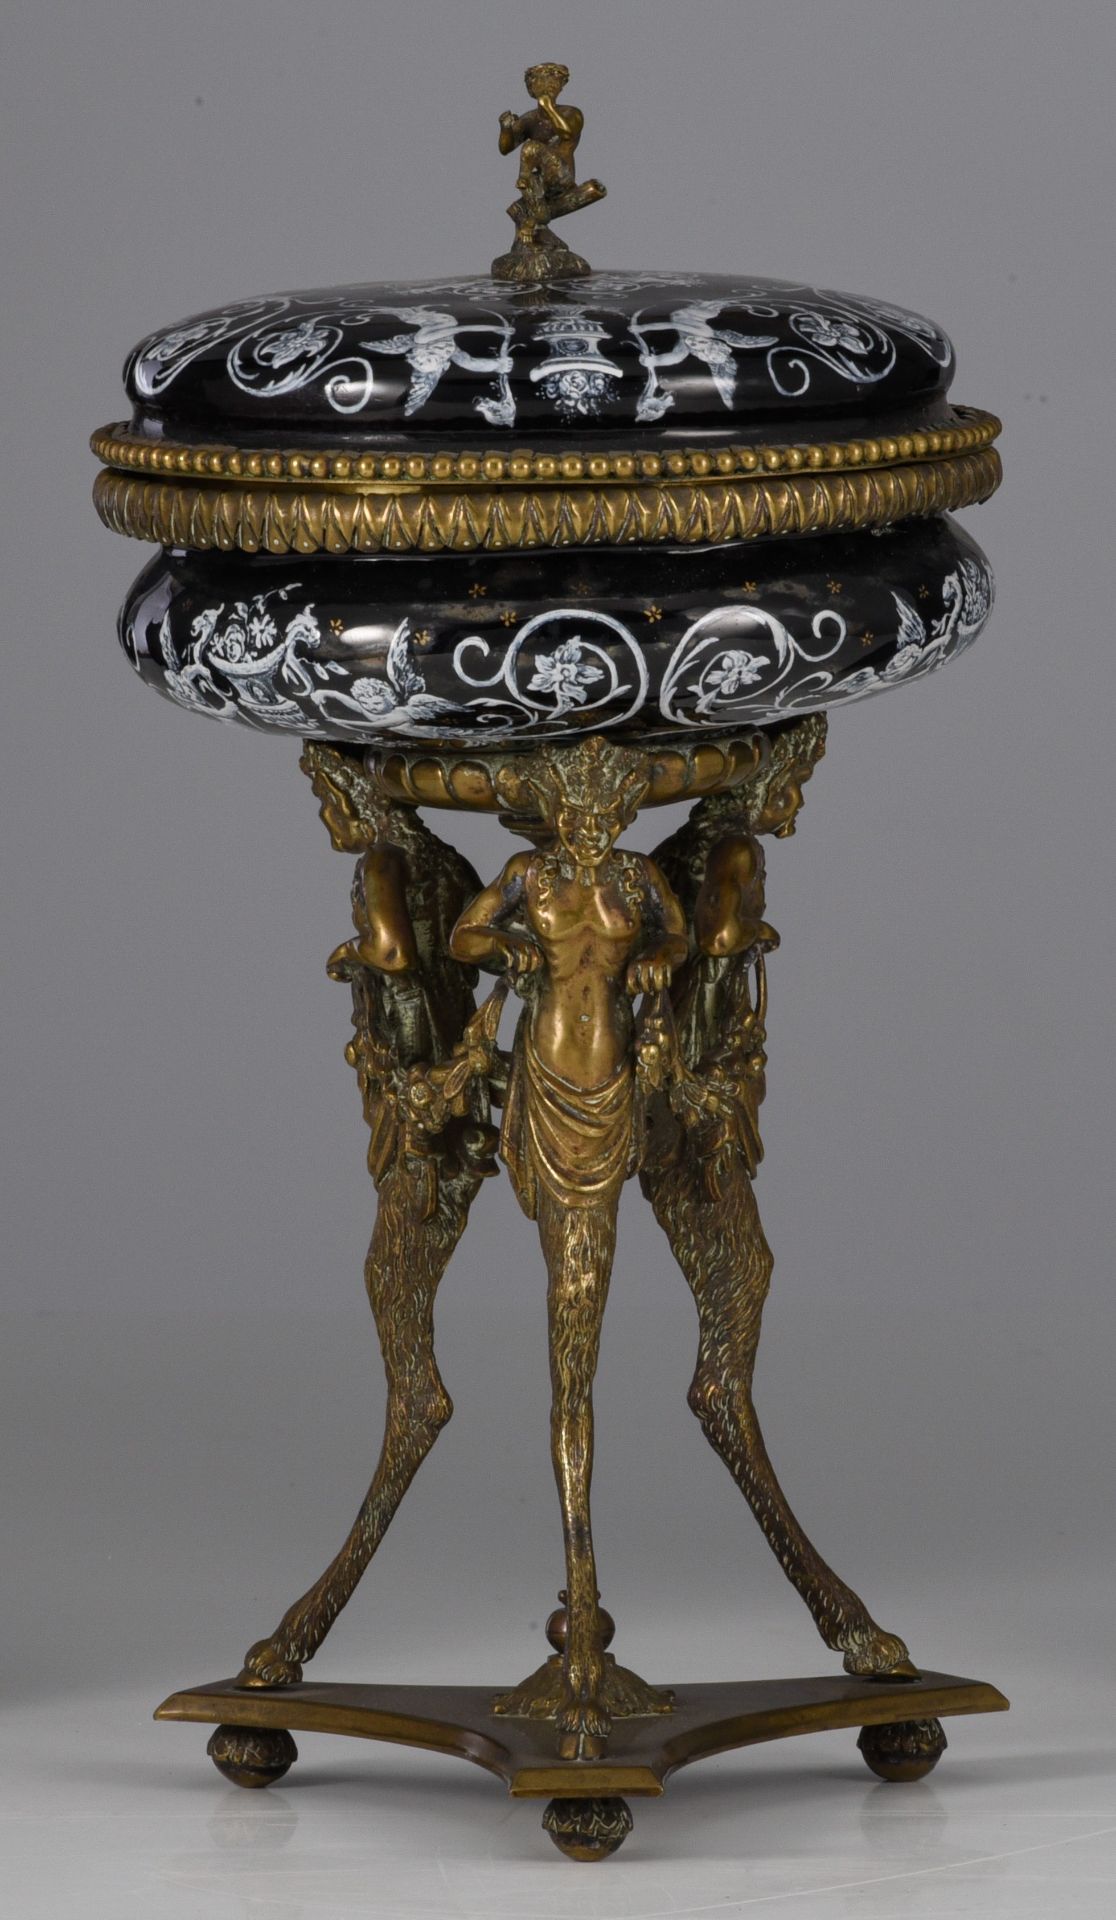 A Limoges enamel box with cover and a tazza with cover, Napoleon III period, H 8 - 23 cm - Image 10 of 16